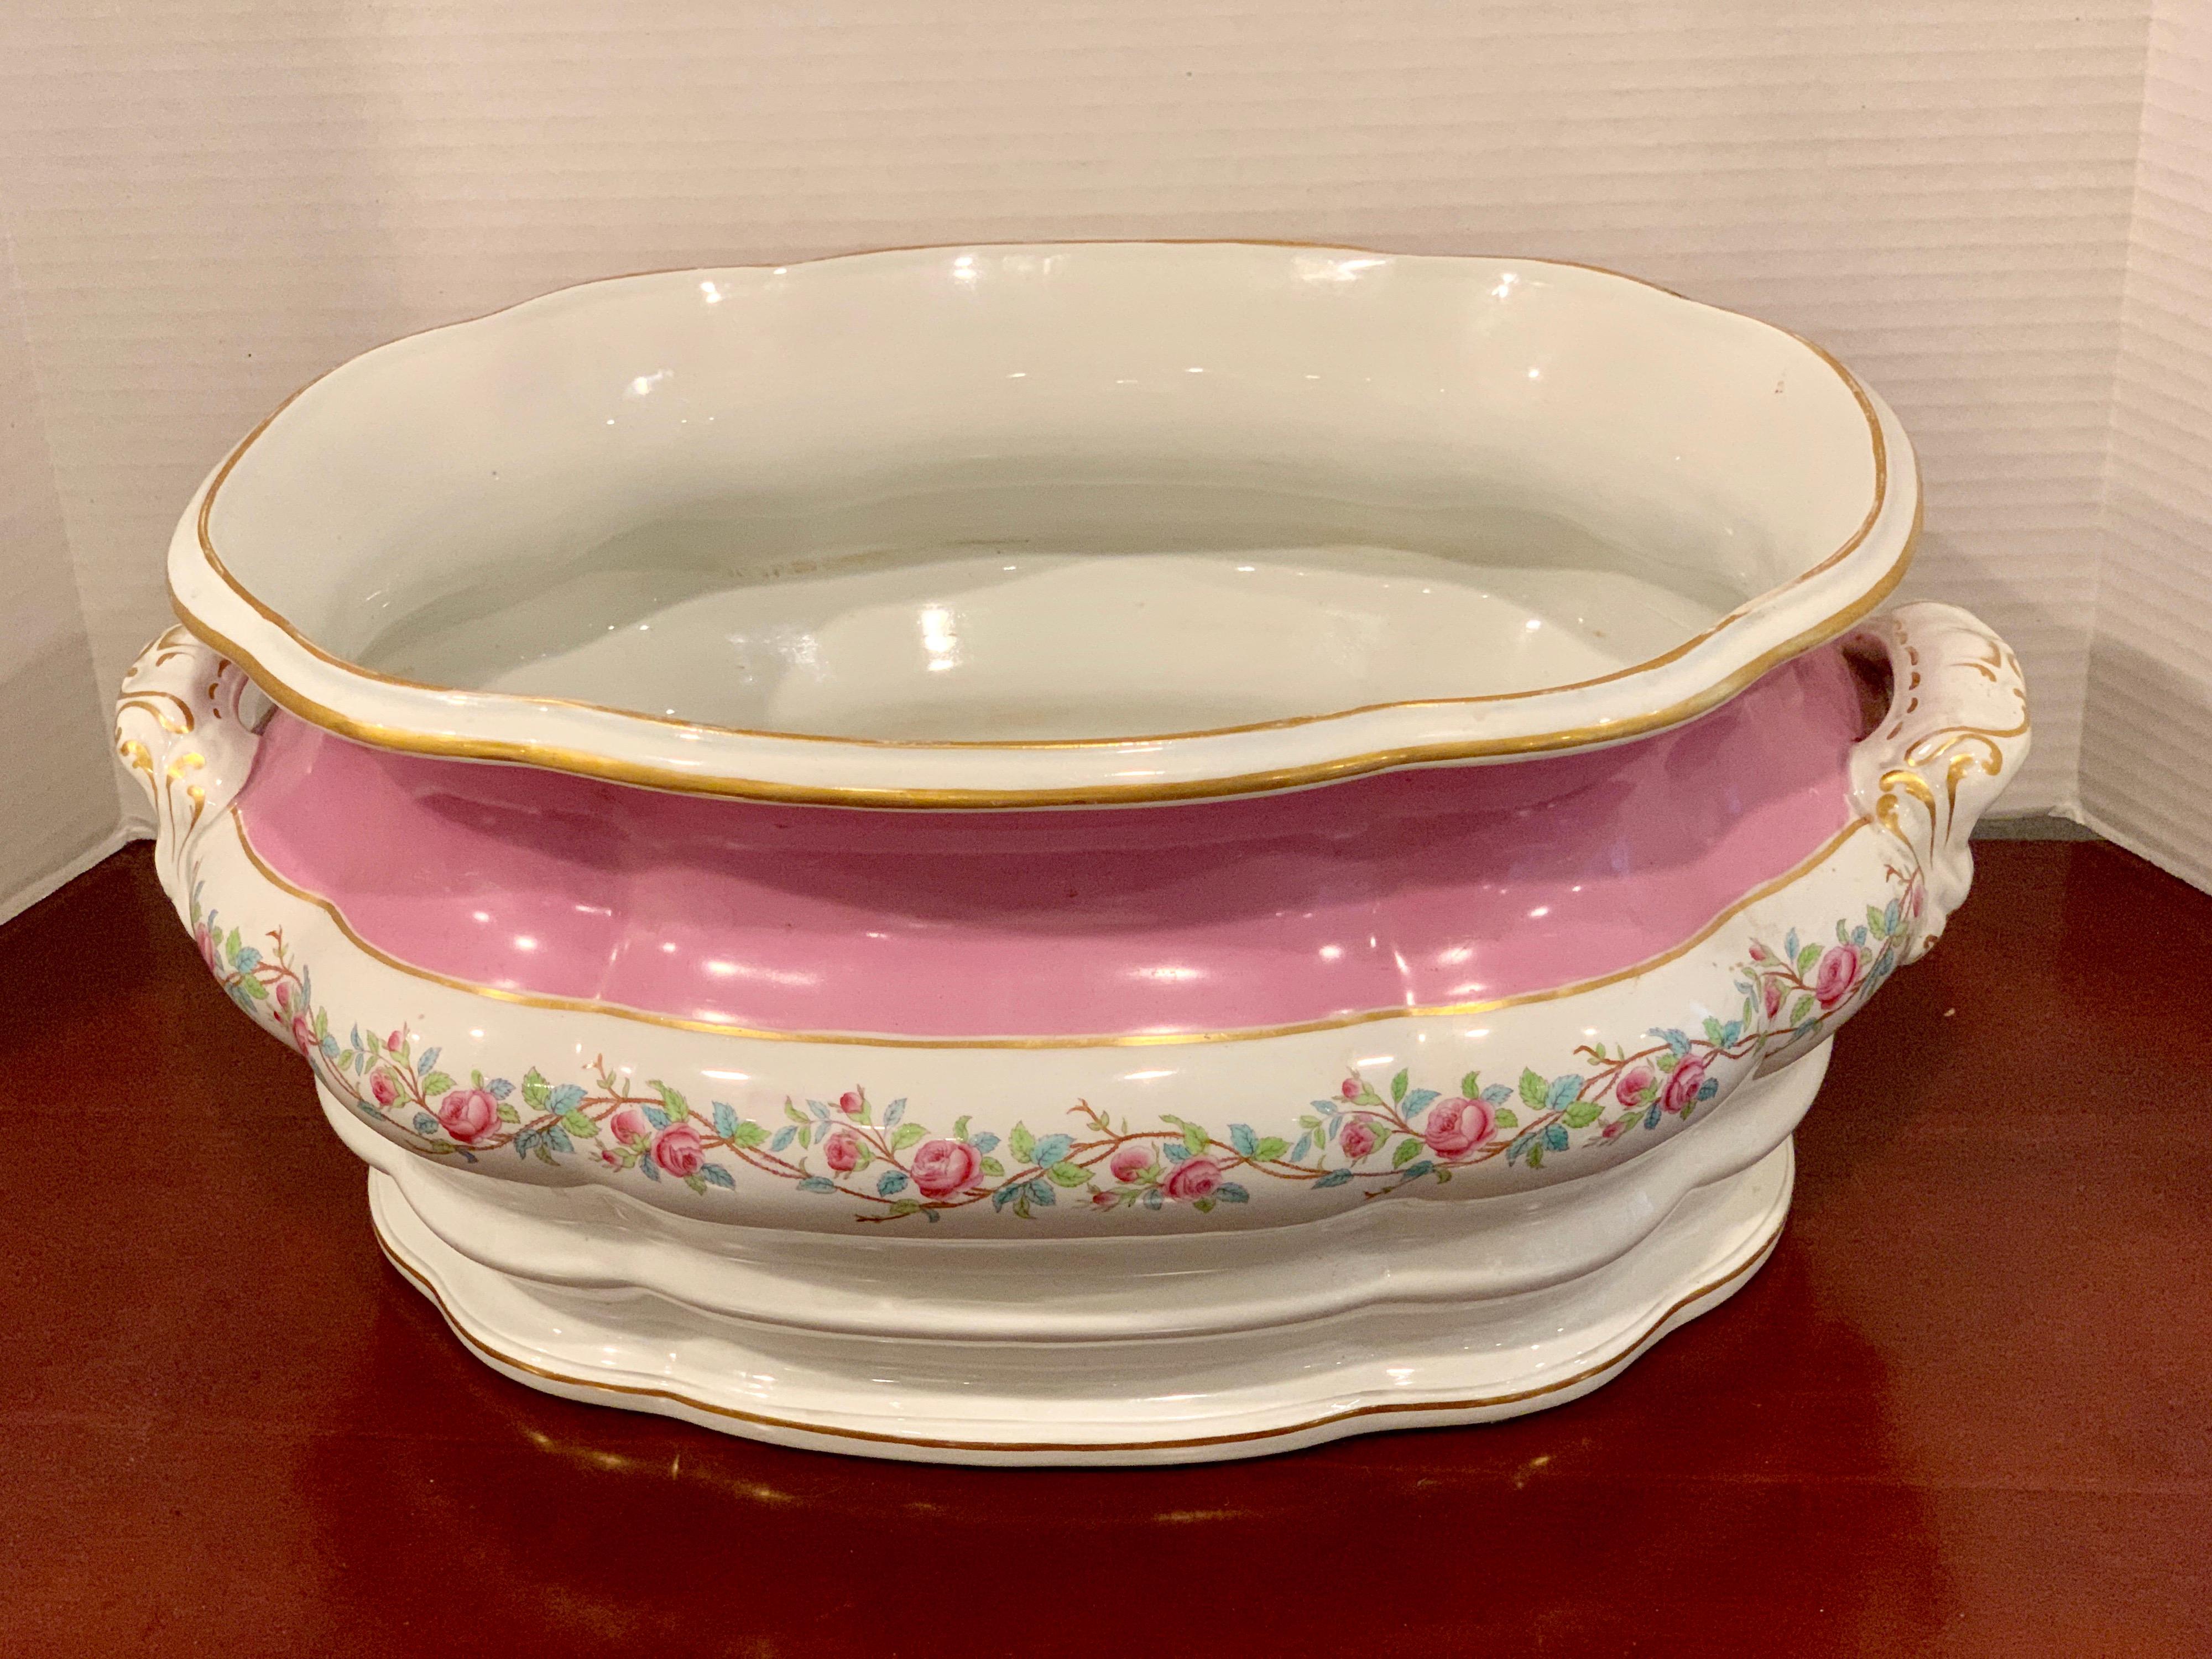 19th Century Pink Floral Porcelain Foot Bath, Attributed to Mintons For Sale 4